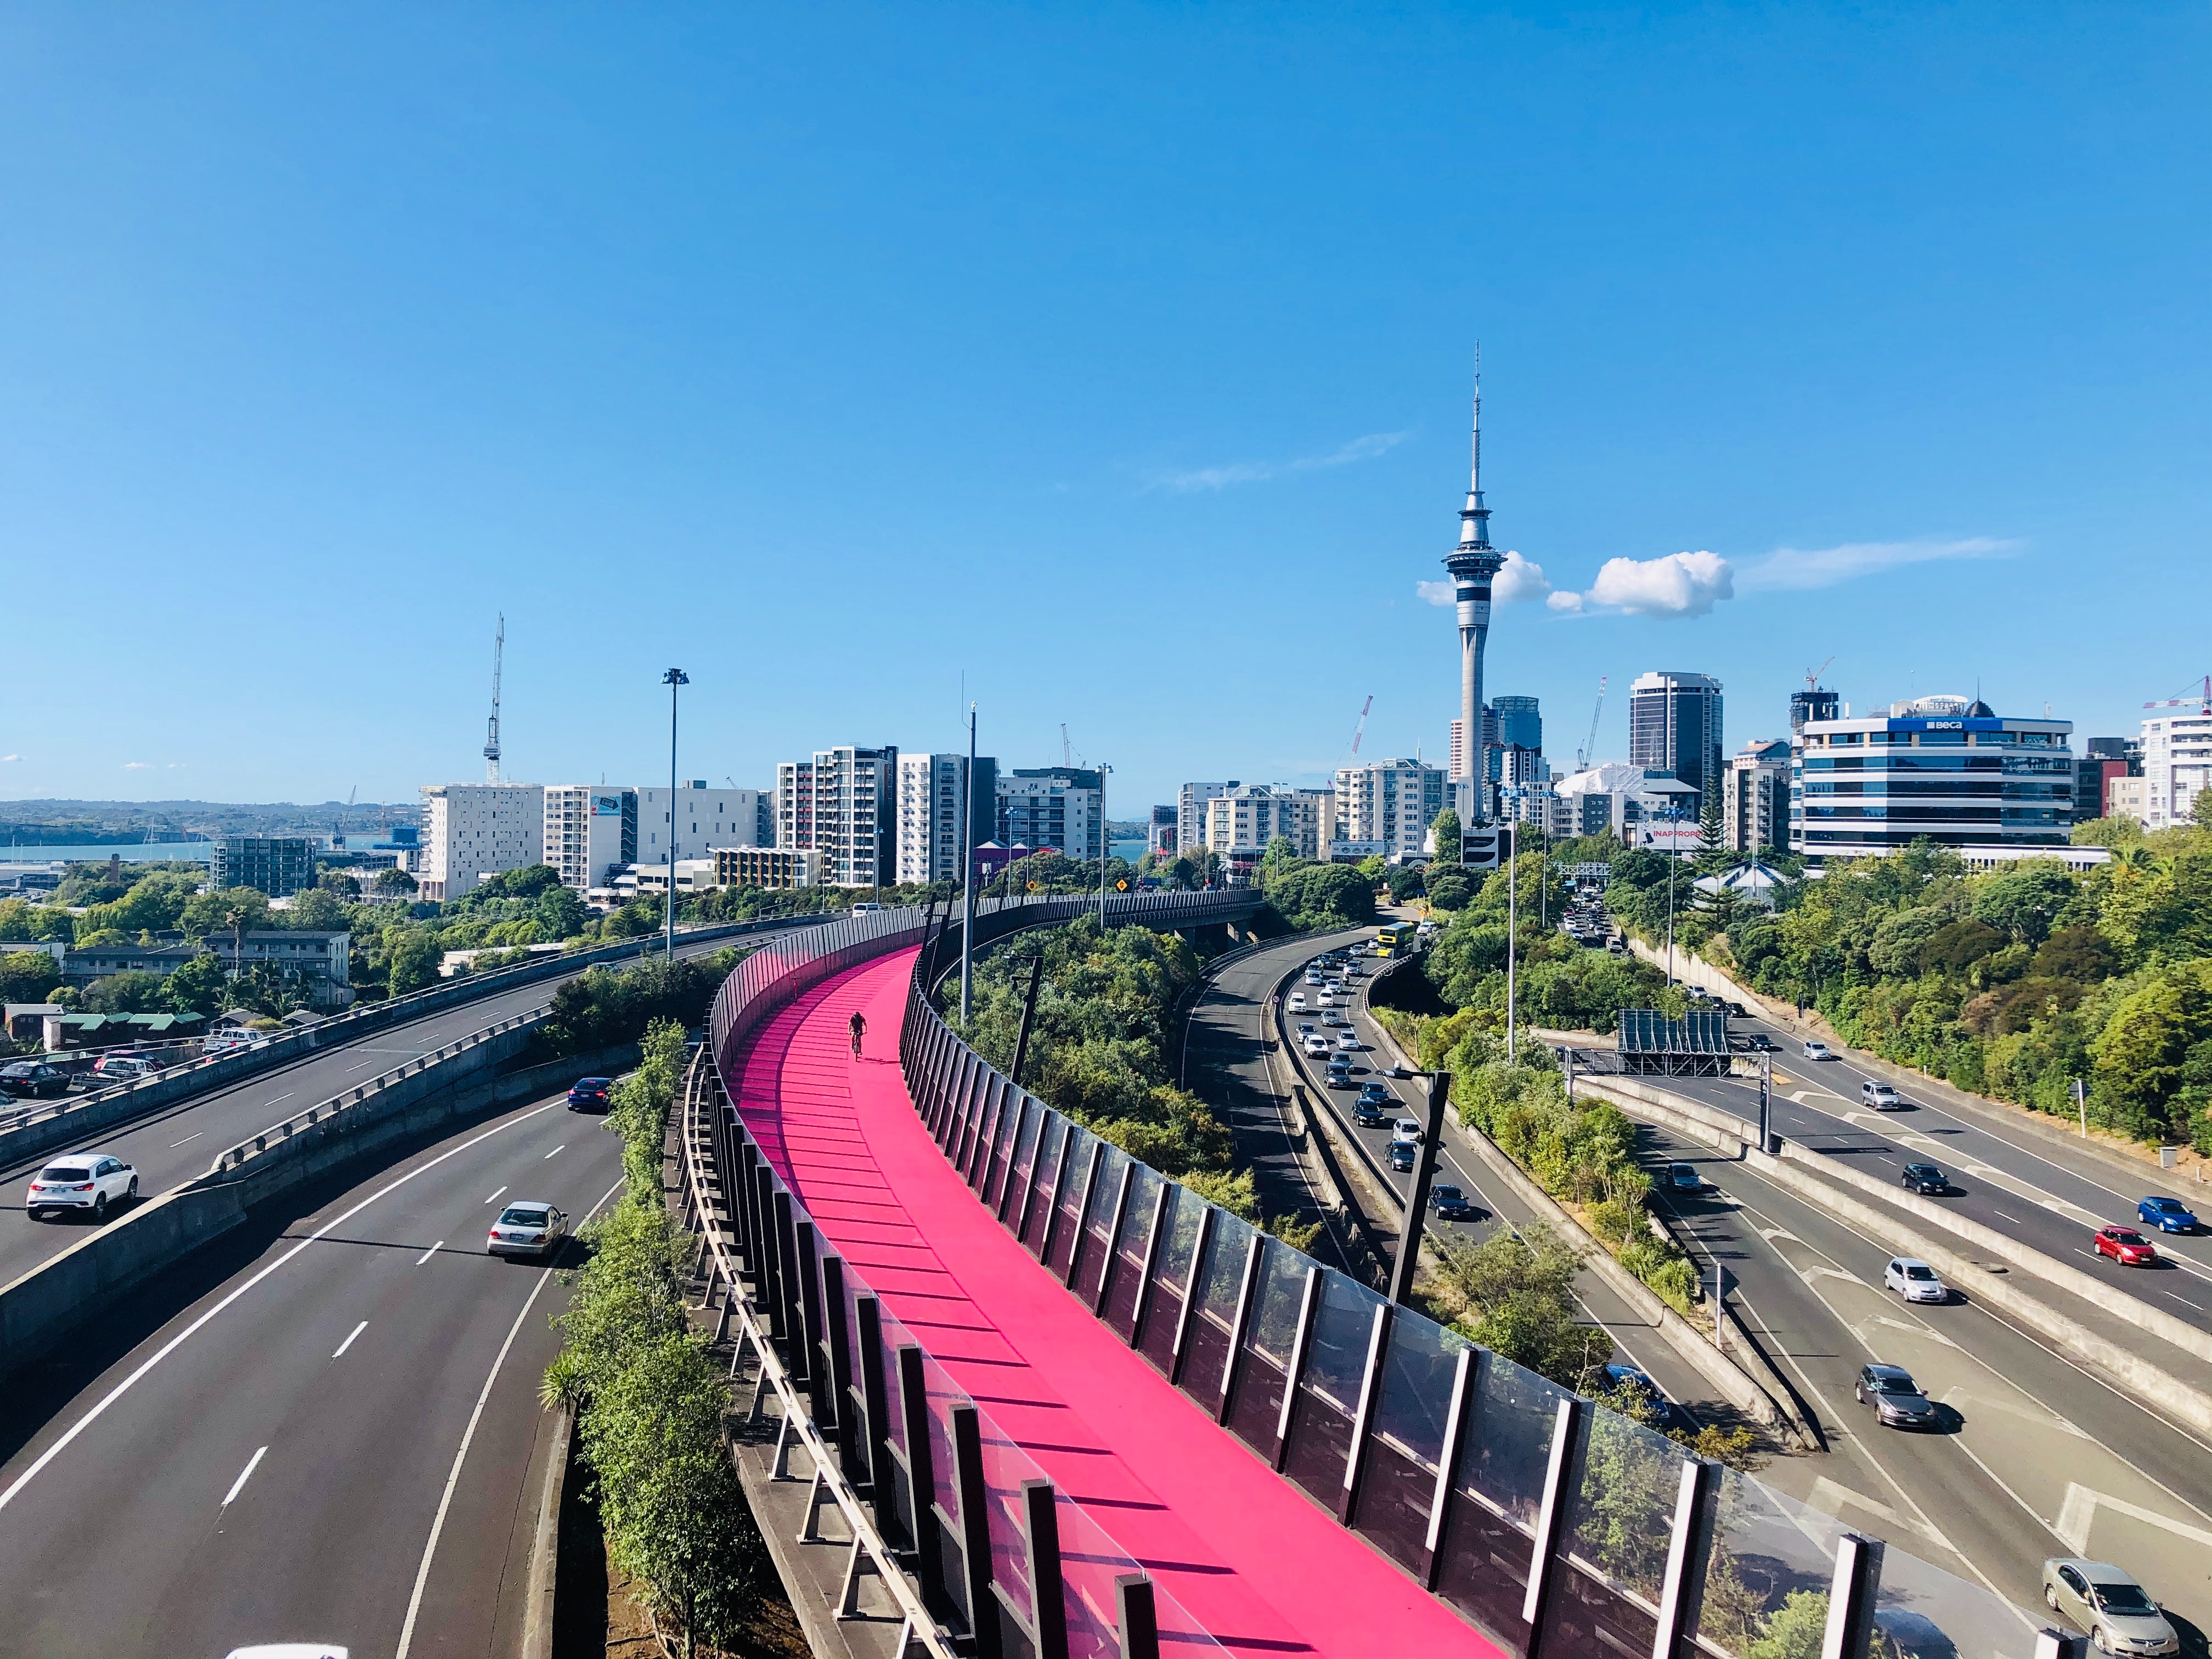 Auckland pink bike path, with Auckland CBD skyline in the background